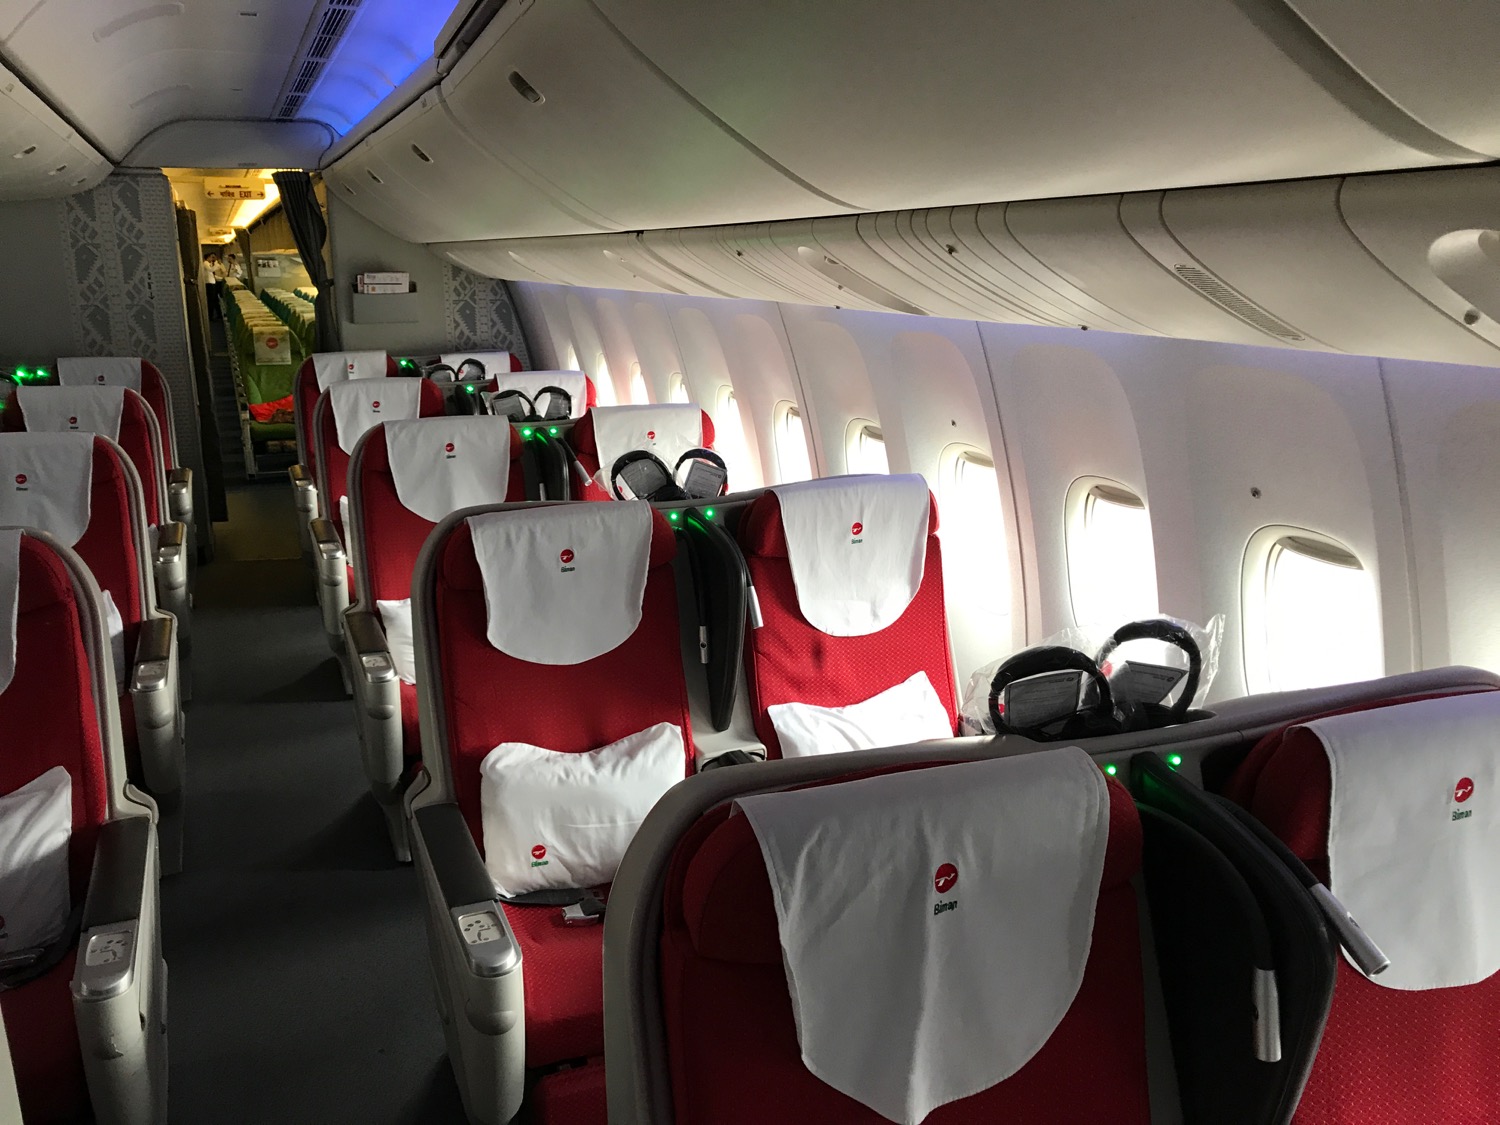 a row of red and white seats on an airplane